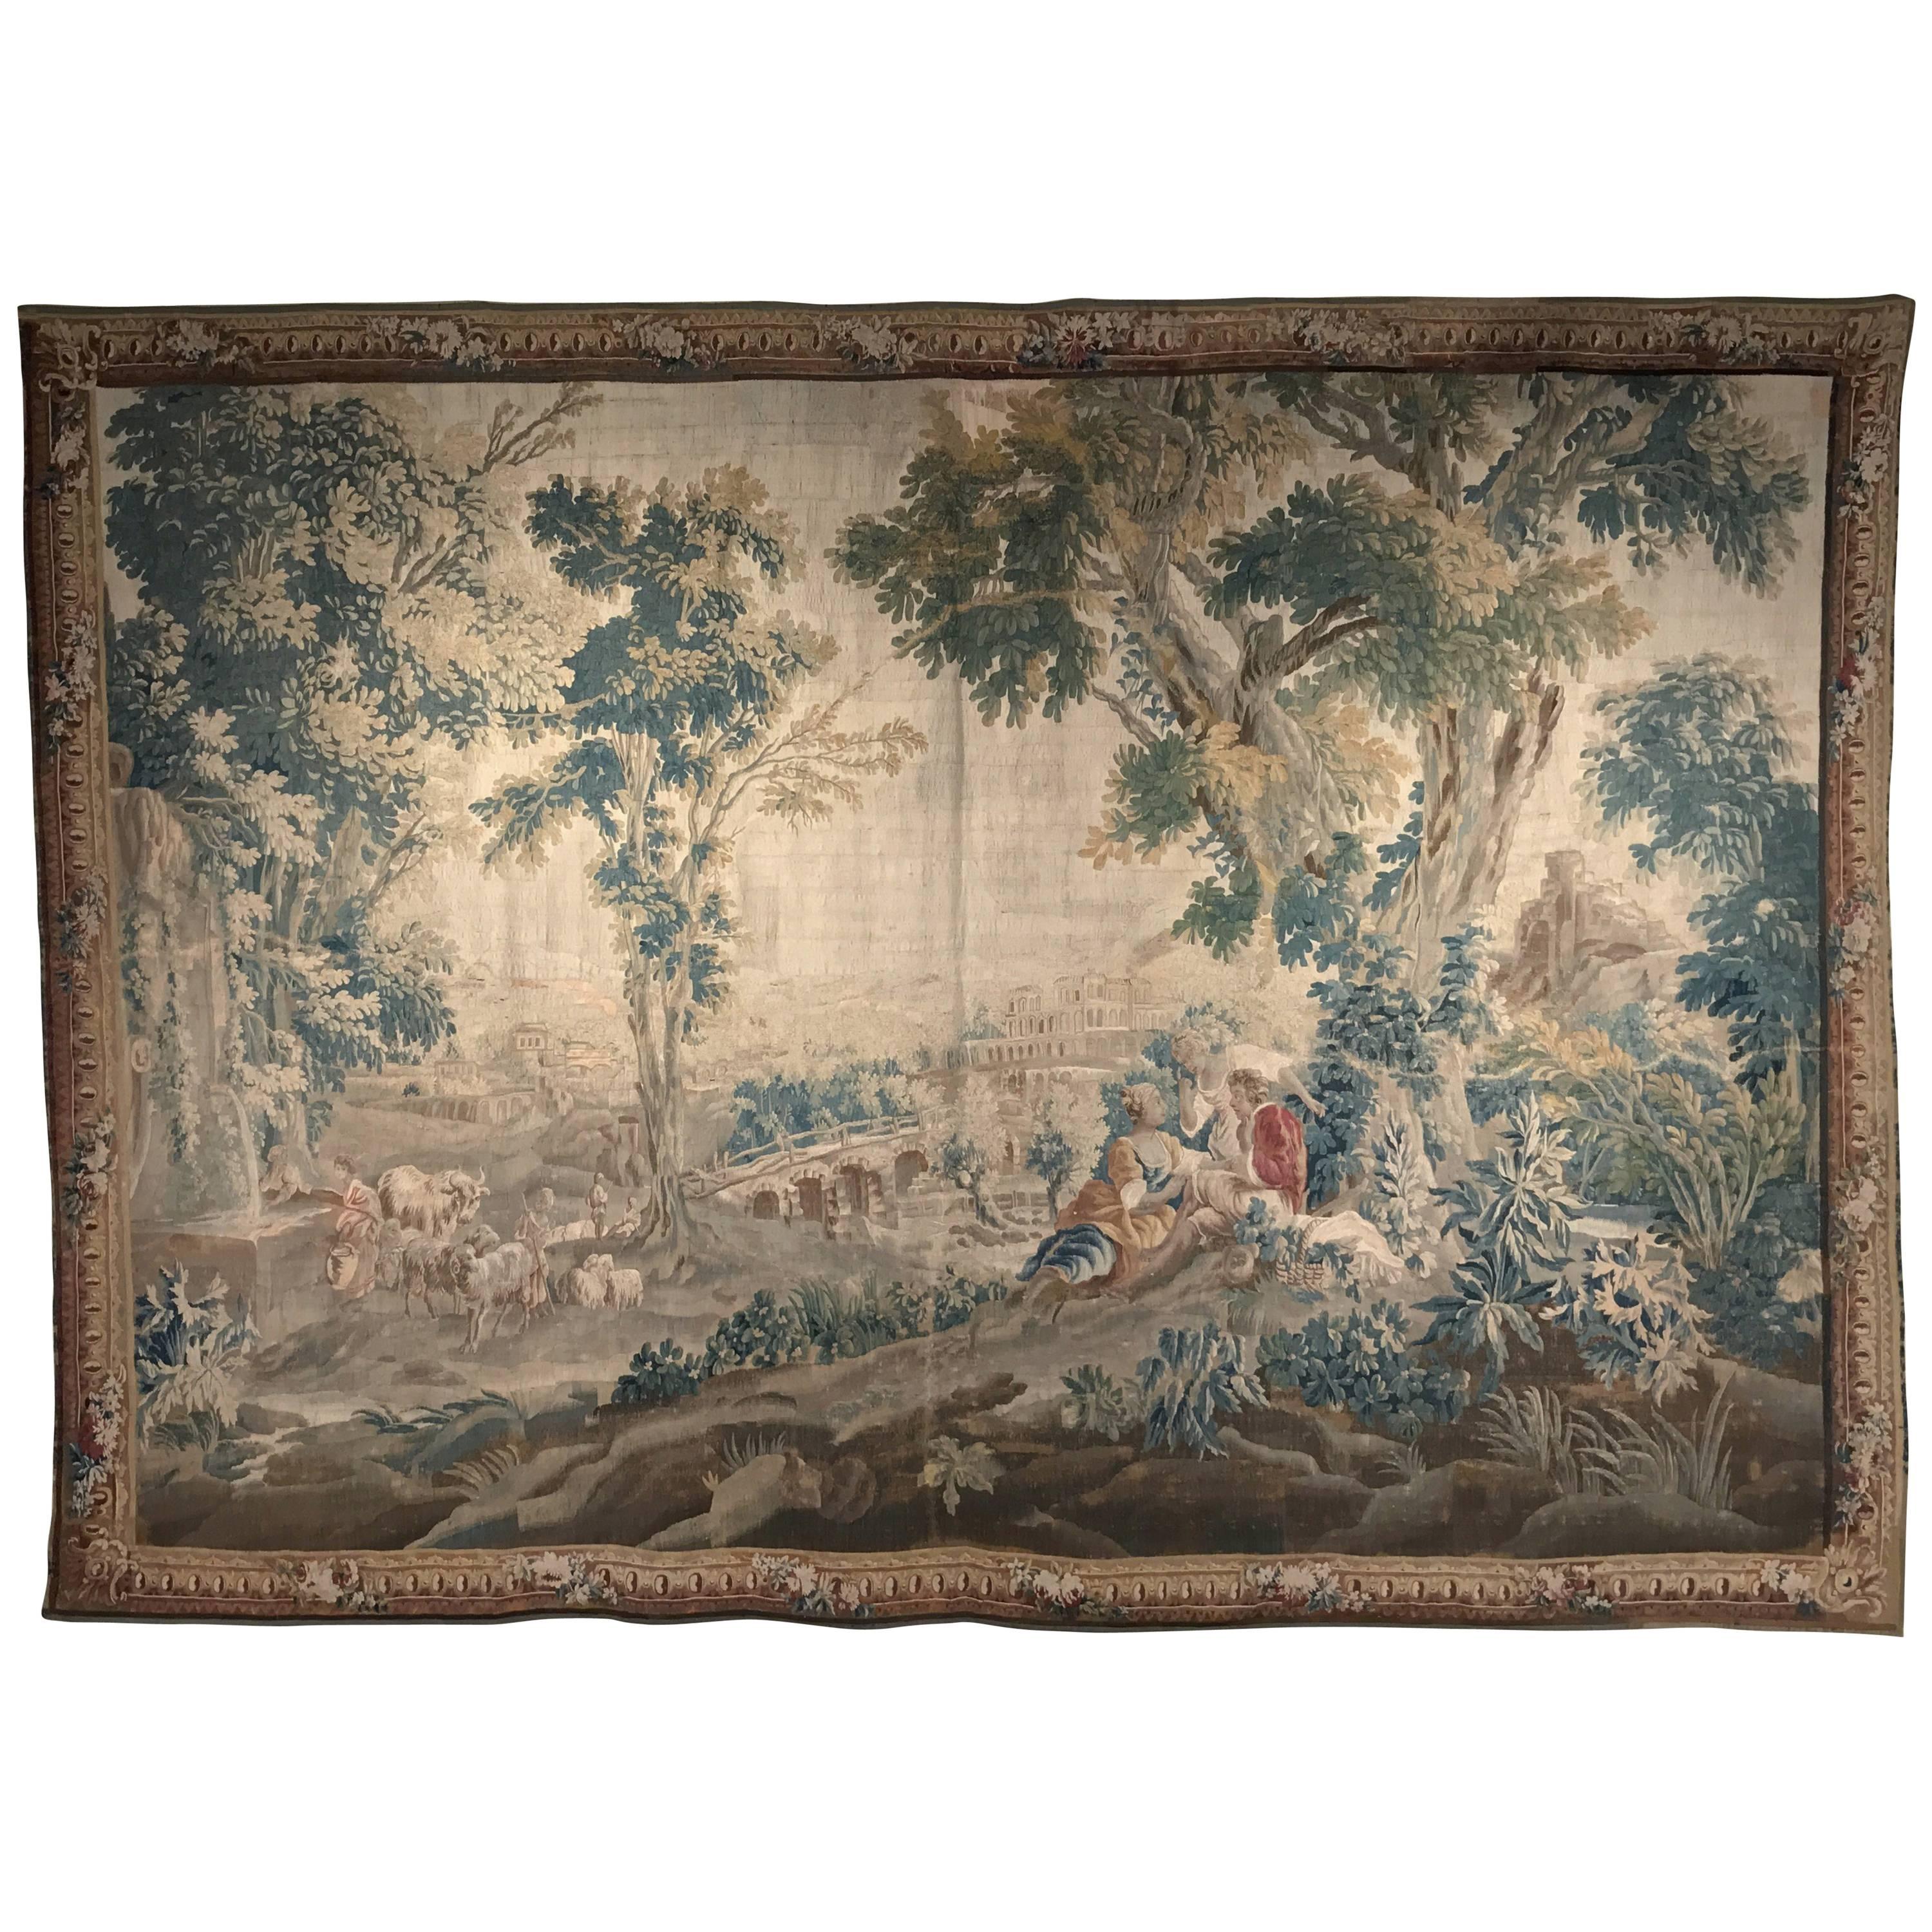 Large 18th Century French Aubusson Pastoral Tapestry in the Manner of Boucher